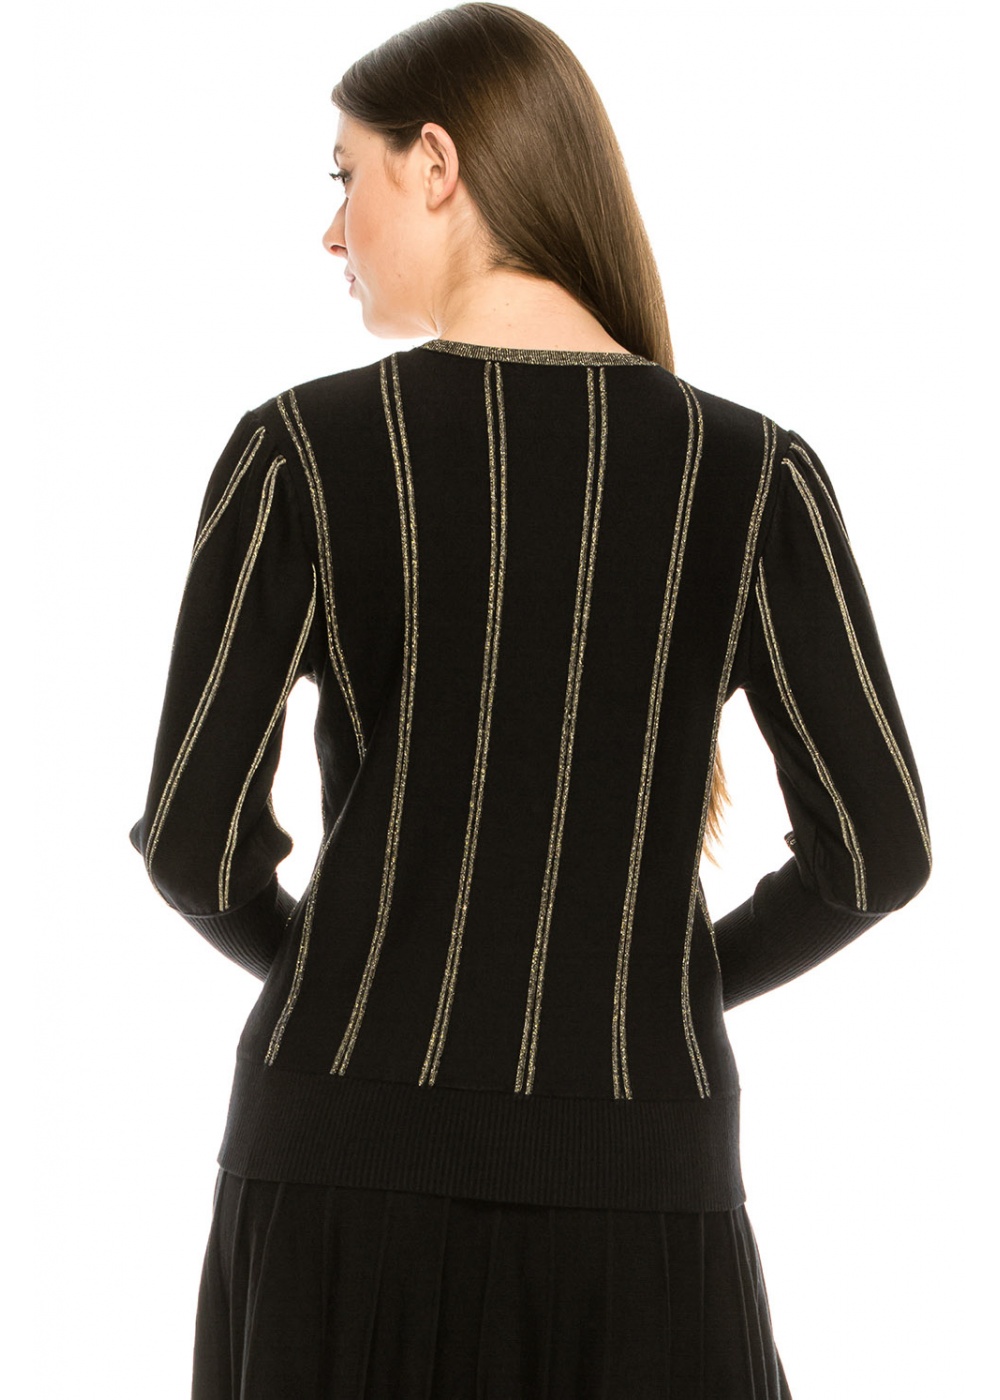 Knit top with Gold Piping